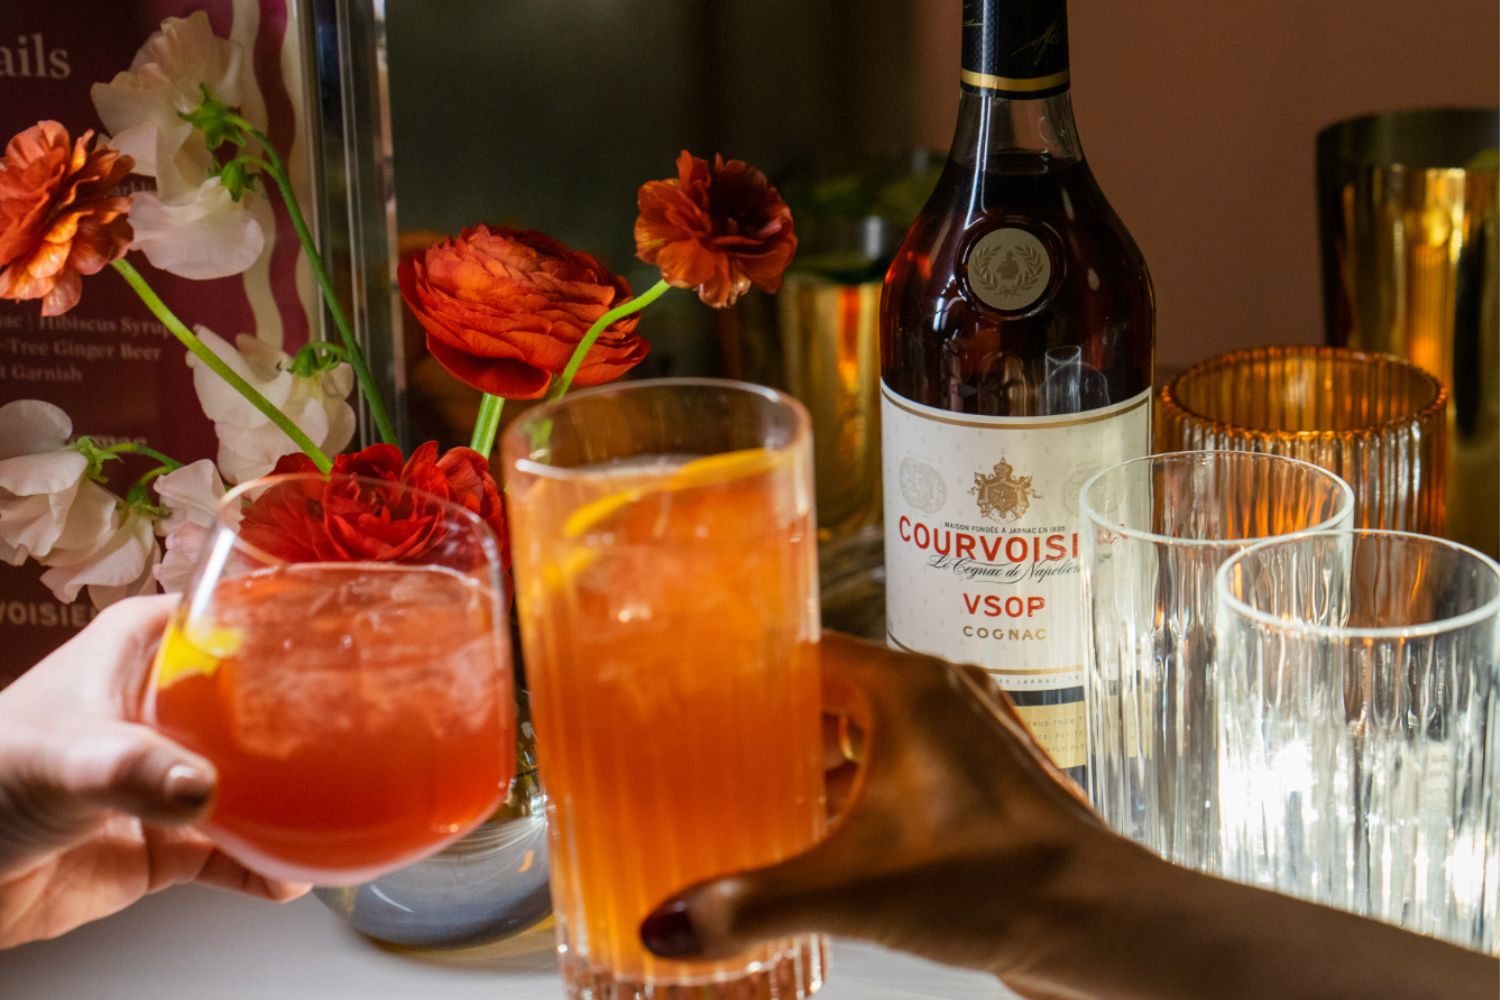 Ways to treat yourself with Courvoisier